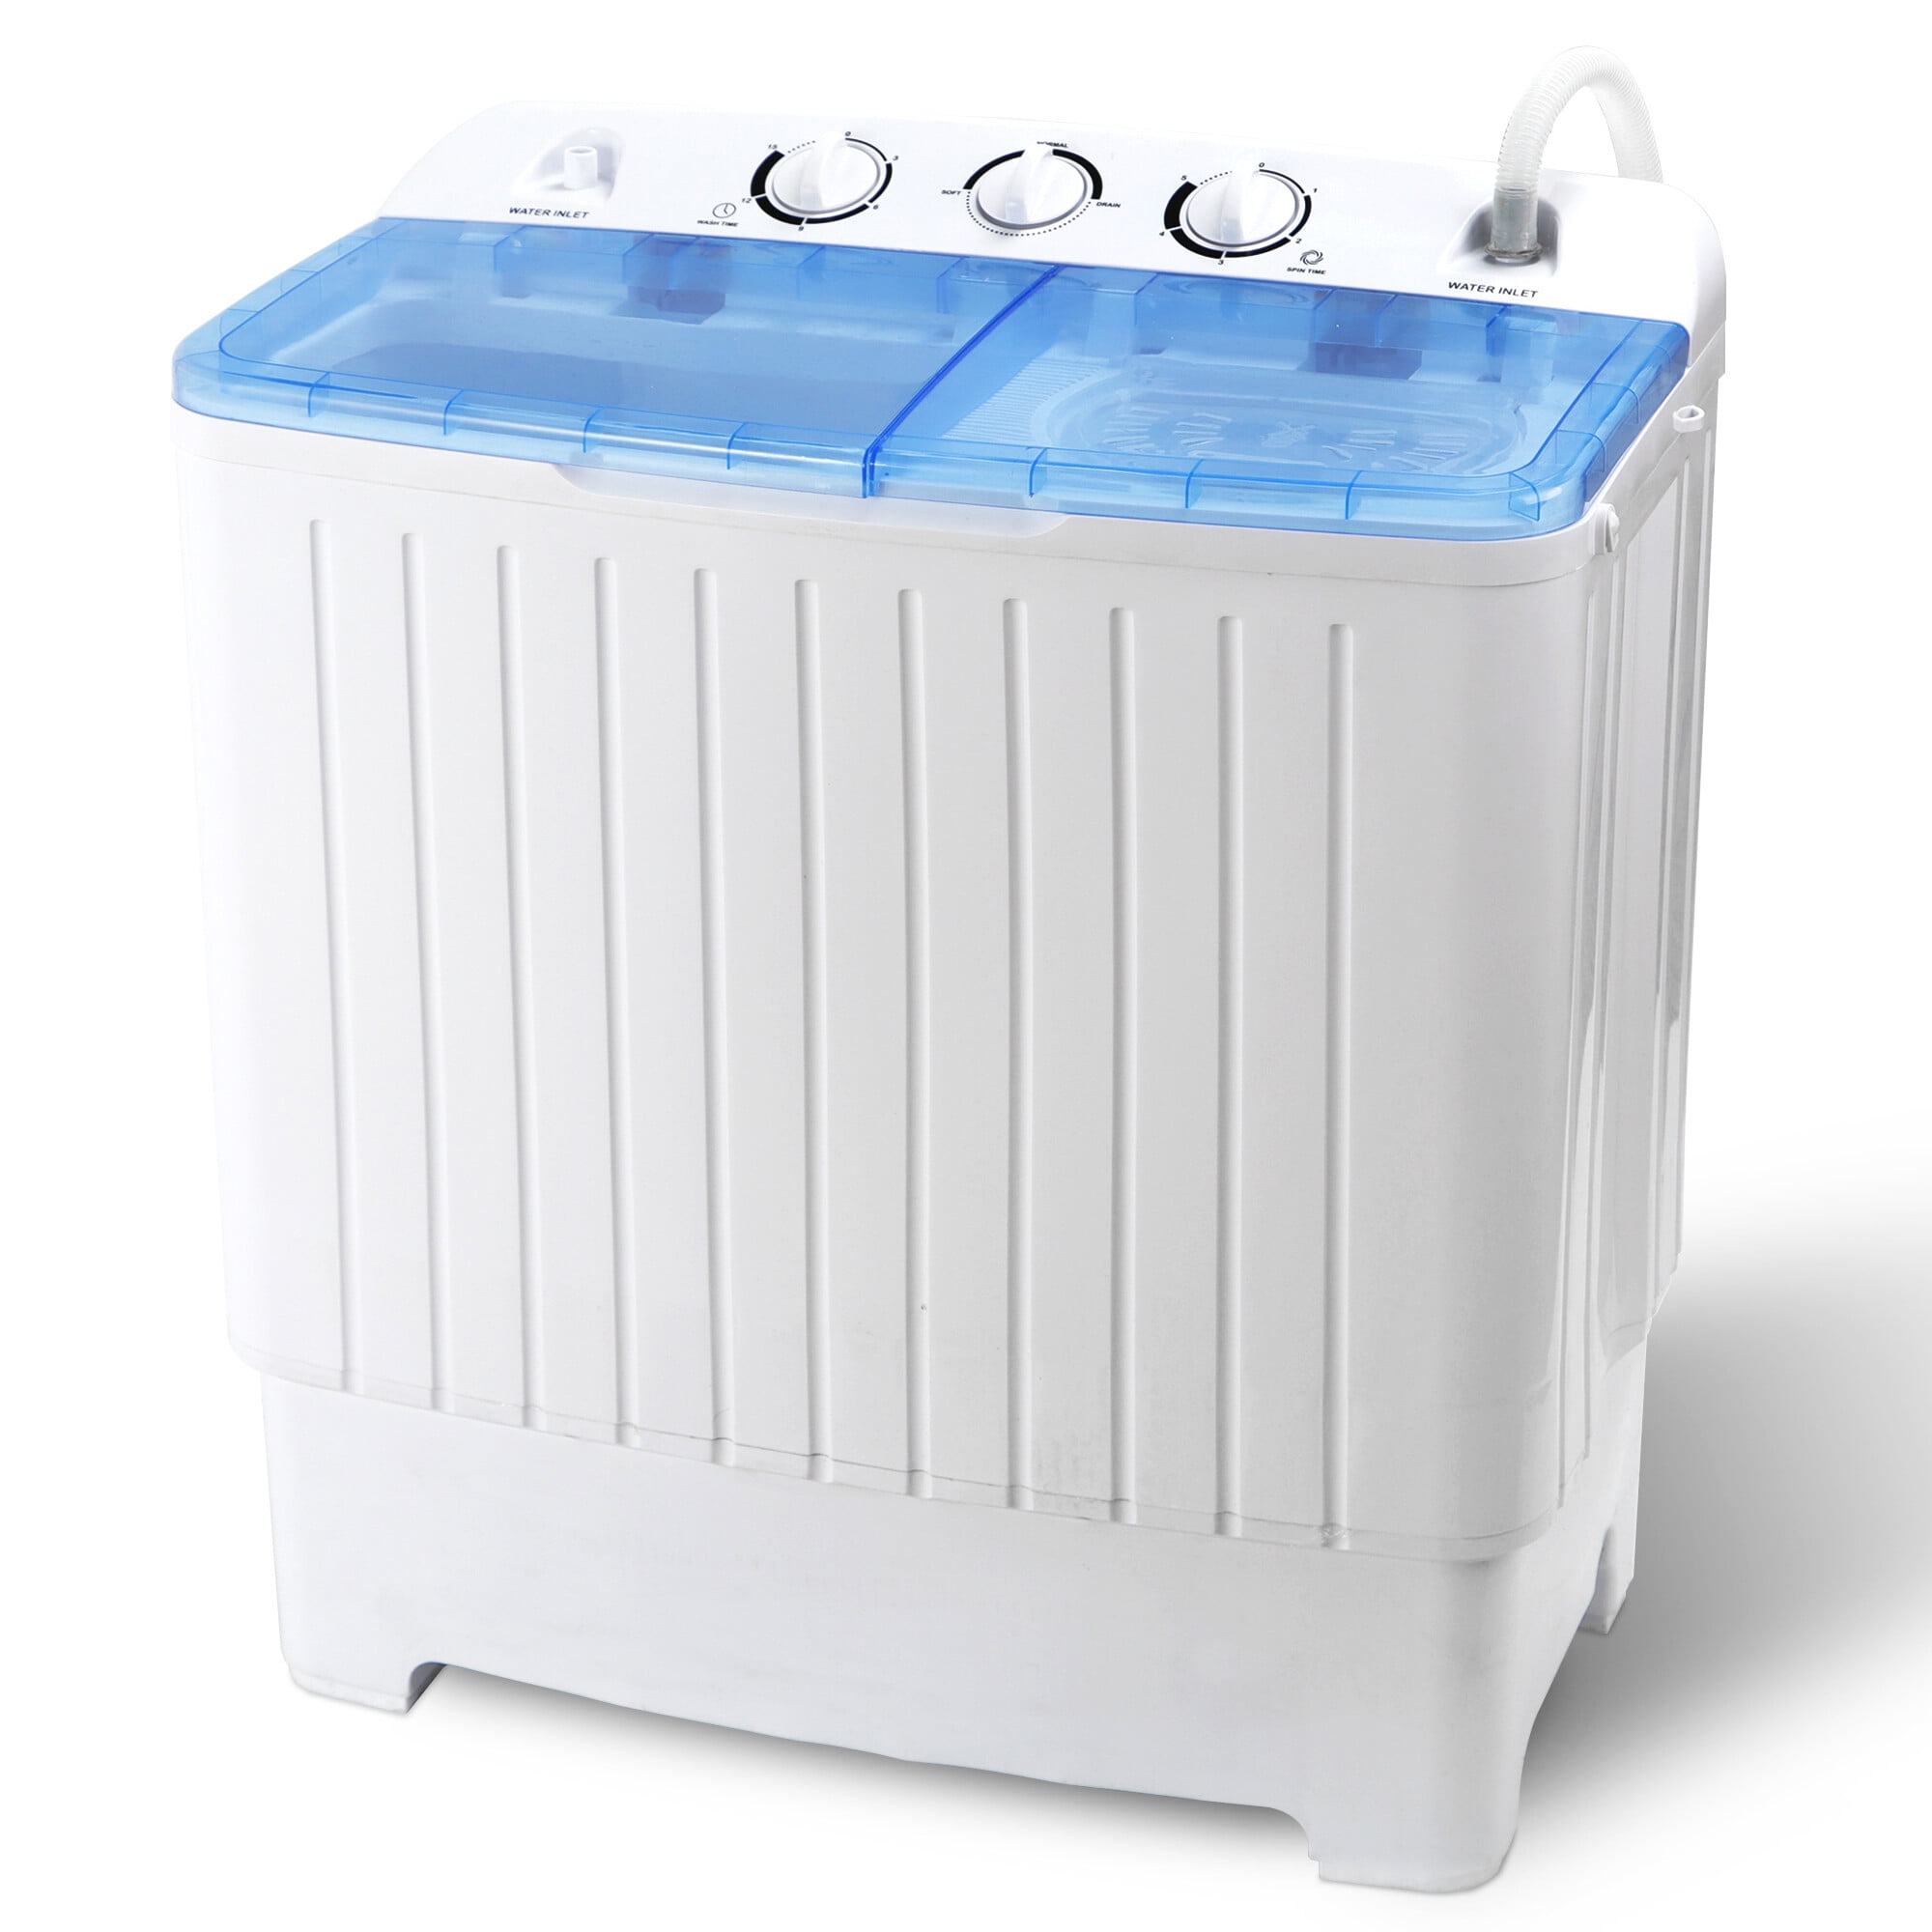 solacol Portable Washing Machine with Spin Dryer Mini Portable Washing  Machine, Bucket Washer for Clothes Laundry, Underwear Washing Machine for